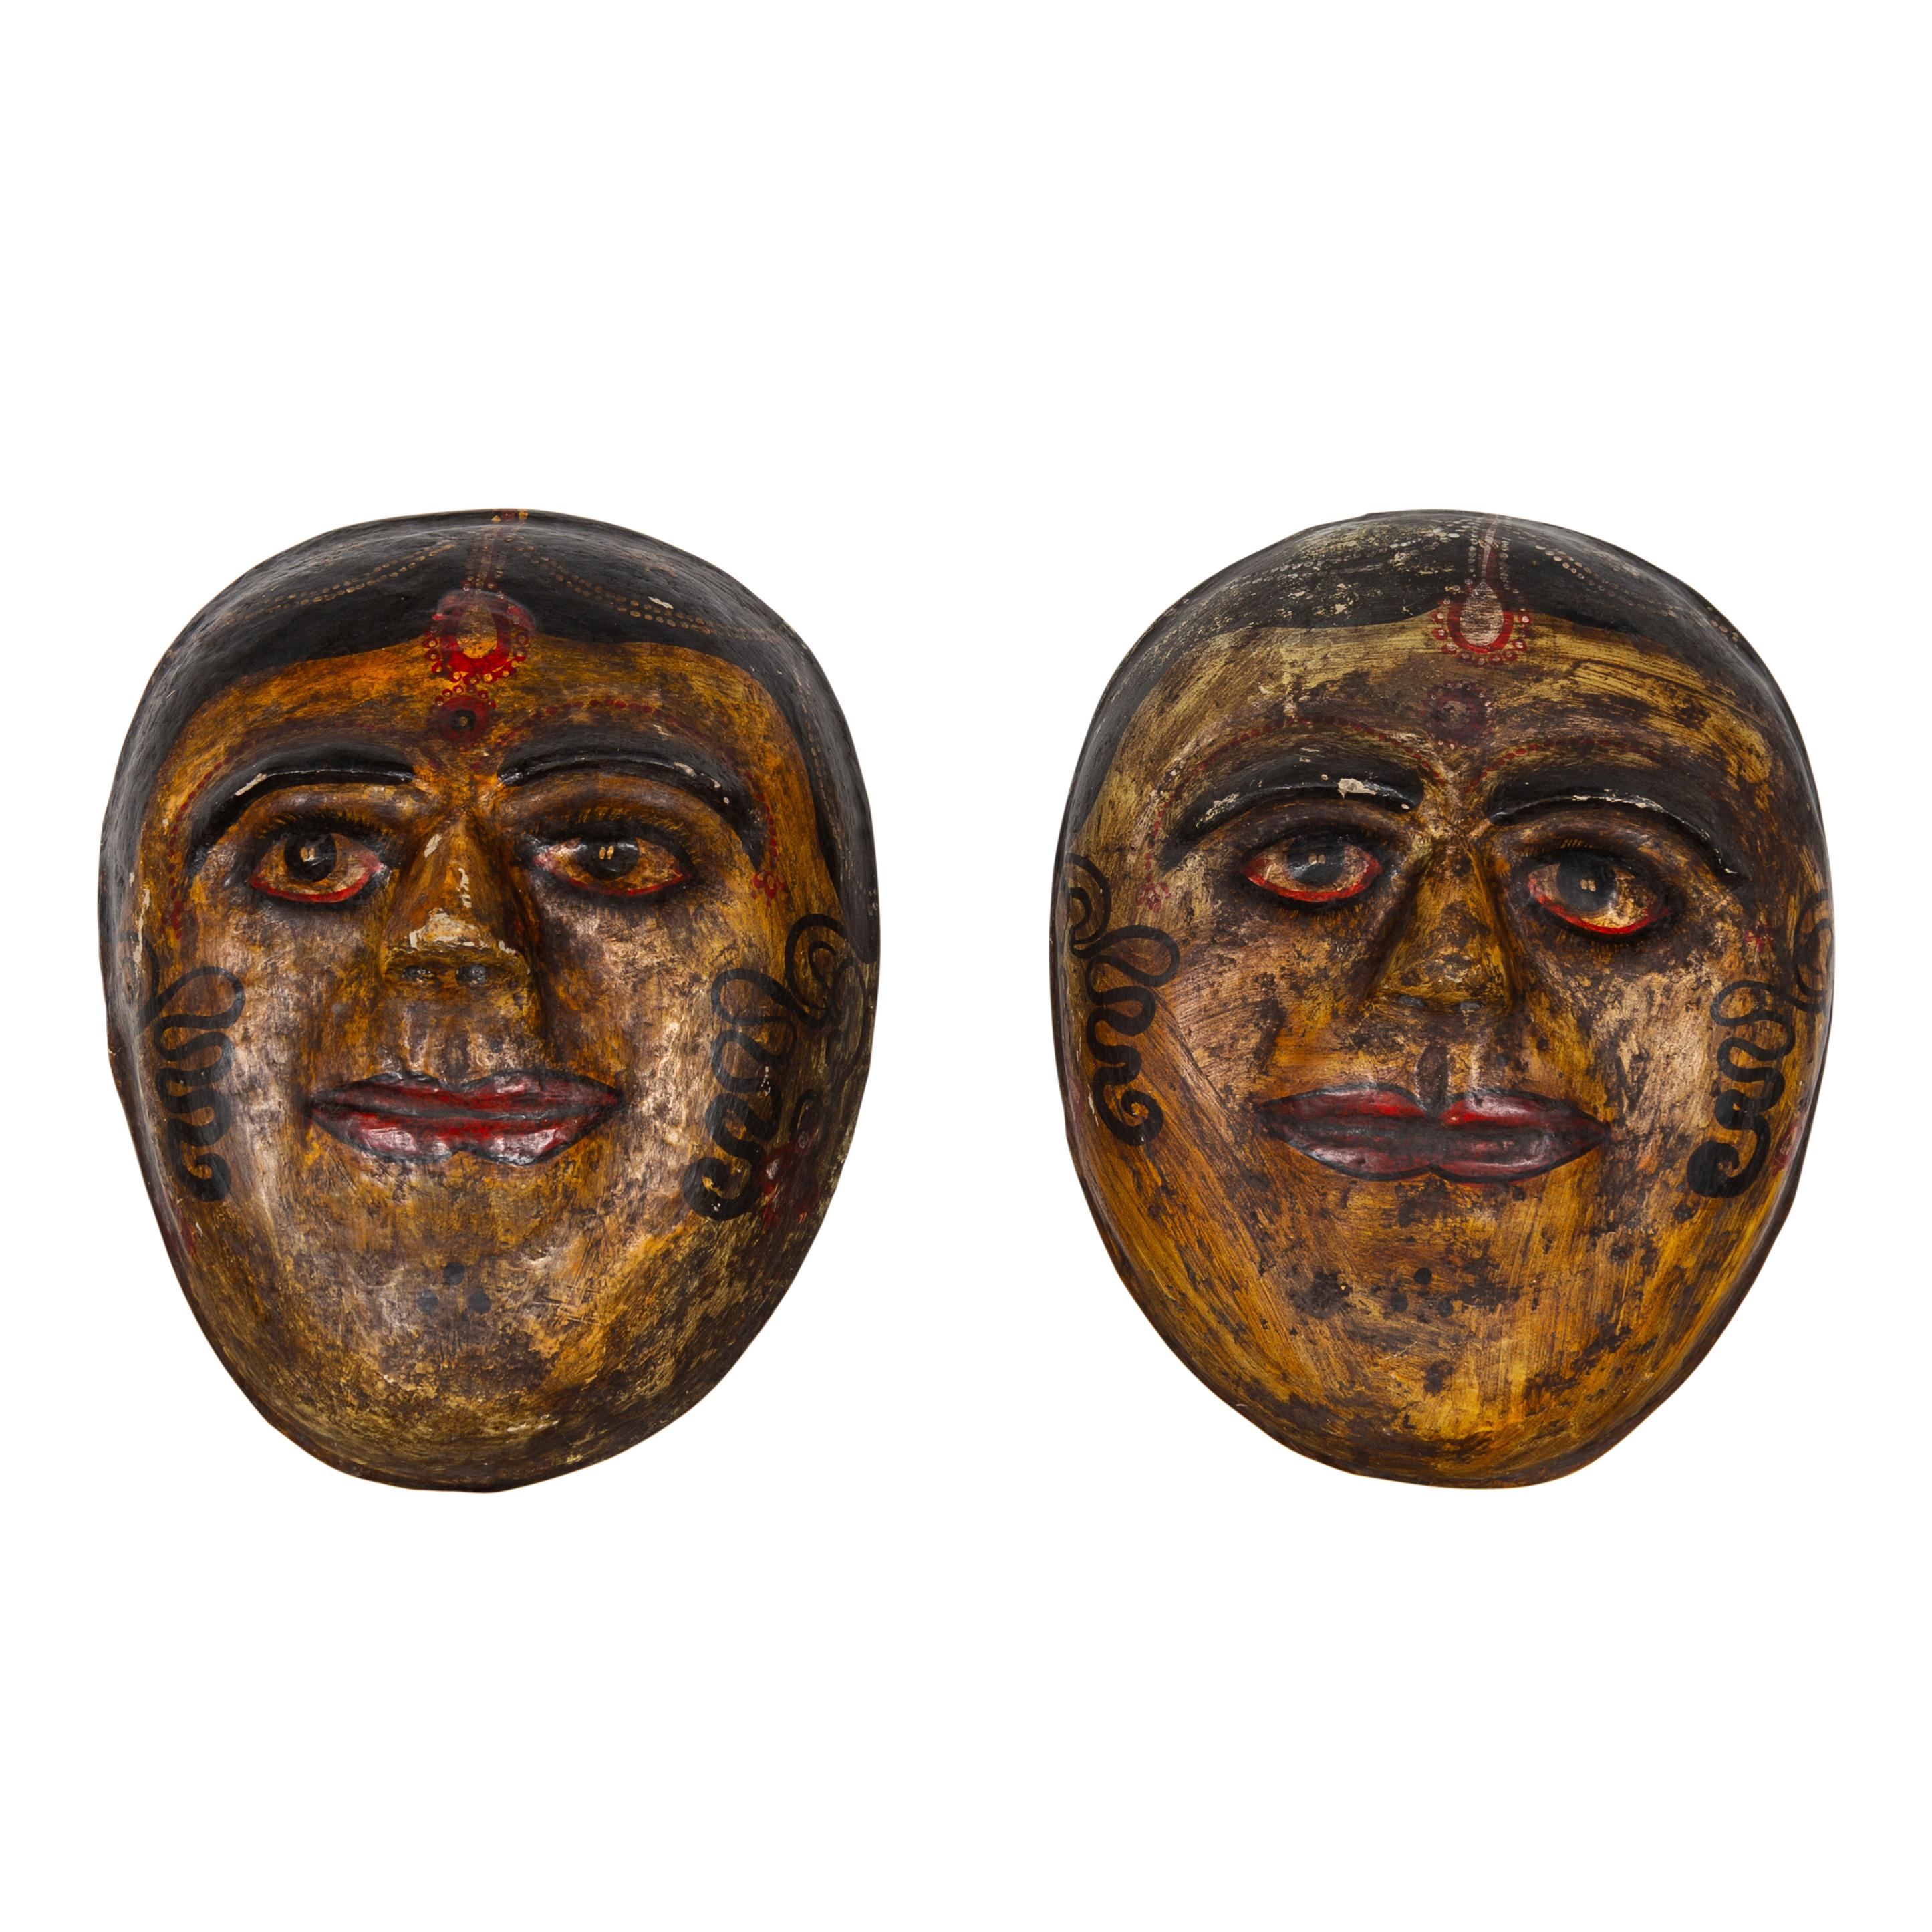 Two antique Indian papier-mâché hand painted face masks from the early 20th century, depicting Indian brides. They are priced and sold individually. Featuring a polychrome finish made of ocher, red and black tones, each of these face masks depicts